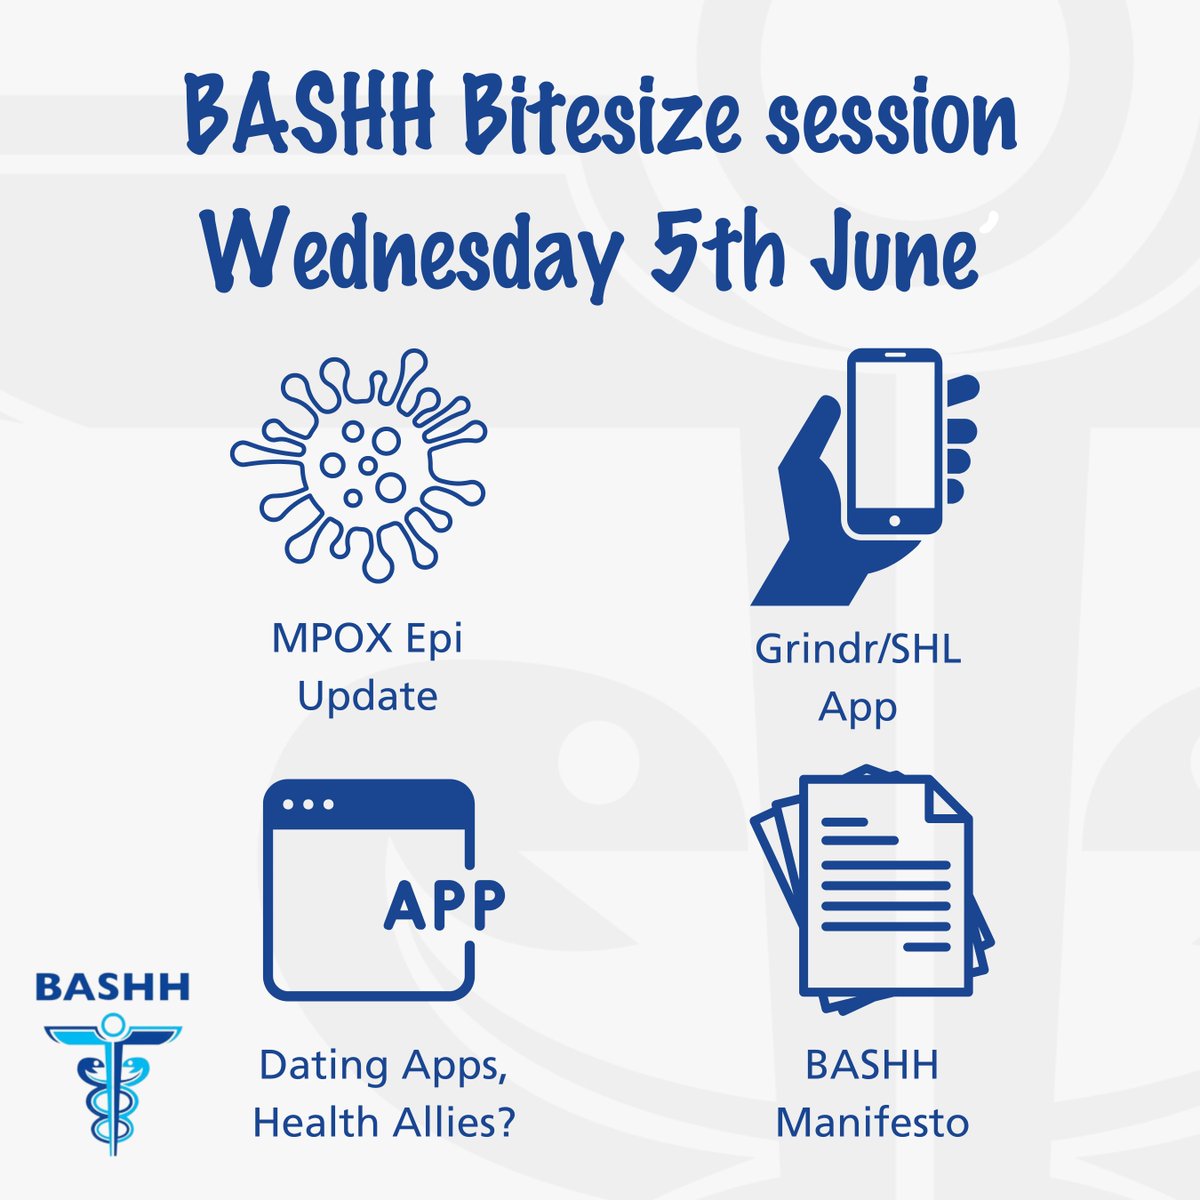 We have another exciting BASHH Bitesize session taking place on Wednesday 5th June from 17:00-18:00 (BST)! Hear from expert speakers such as Hannah Charles from @UKHSA, @JGarciaIglesias as well as our President @Prof_Matt_P. Join for free ➡️ bit.ly/451sb7I